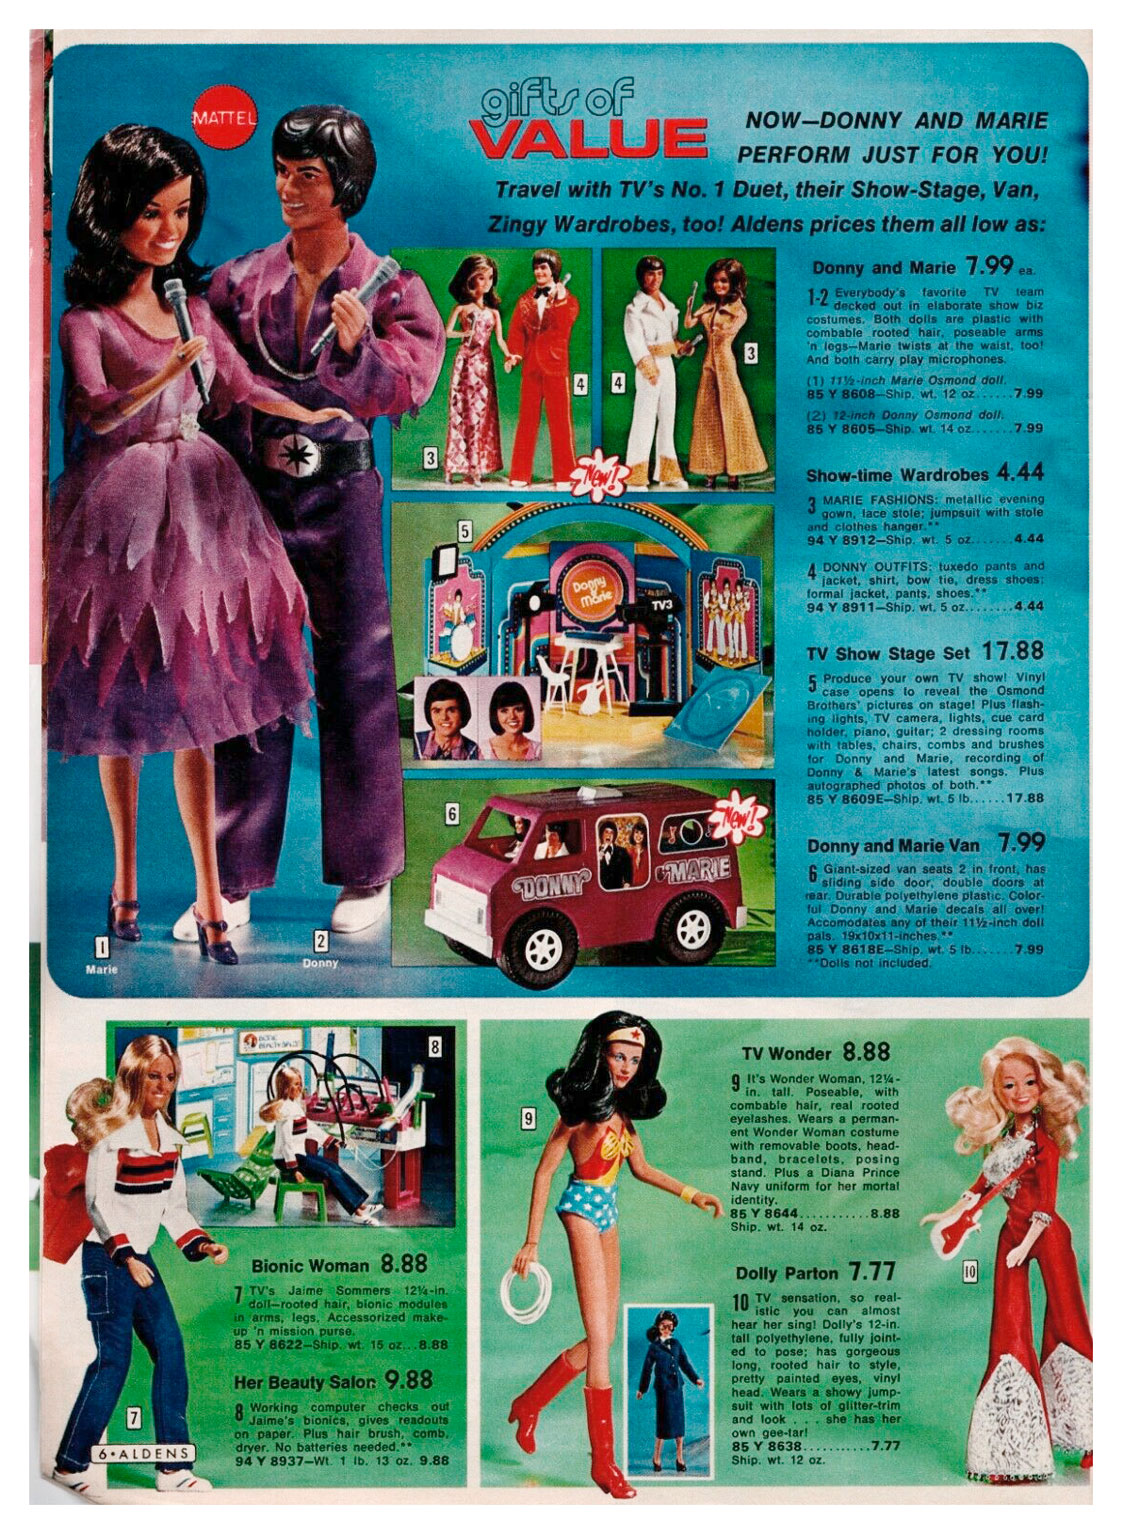 From 1977 Aldens Christmas catalogue